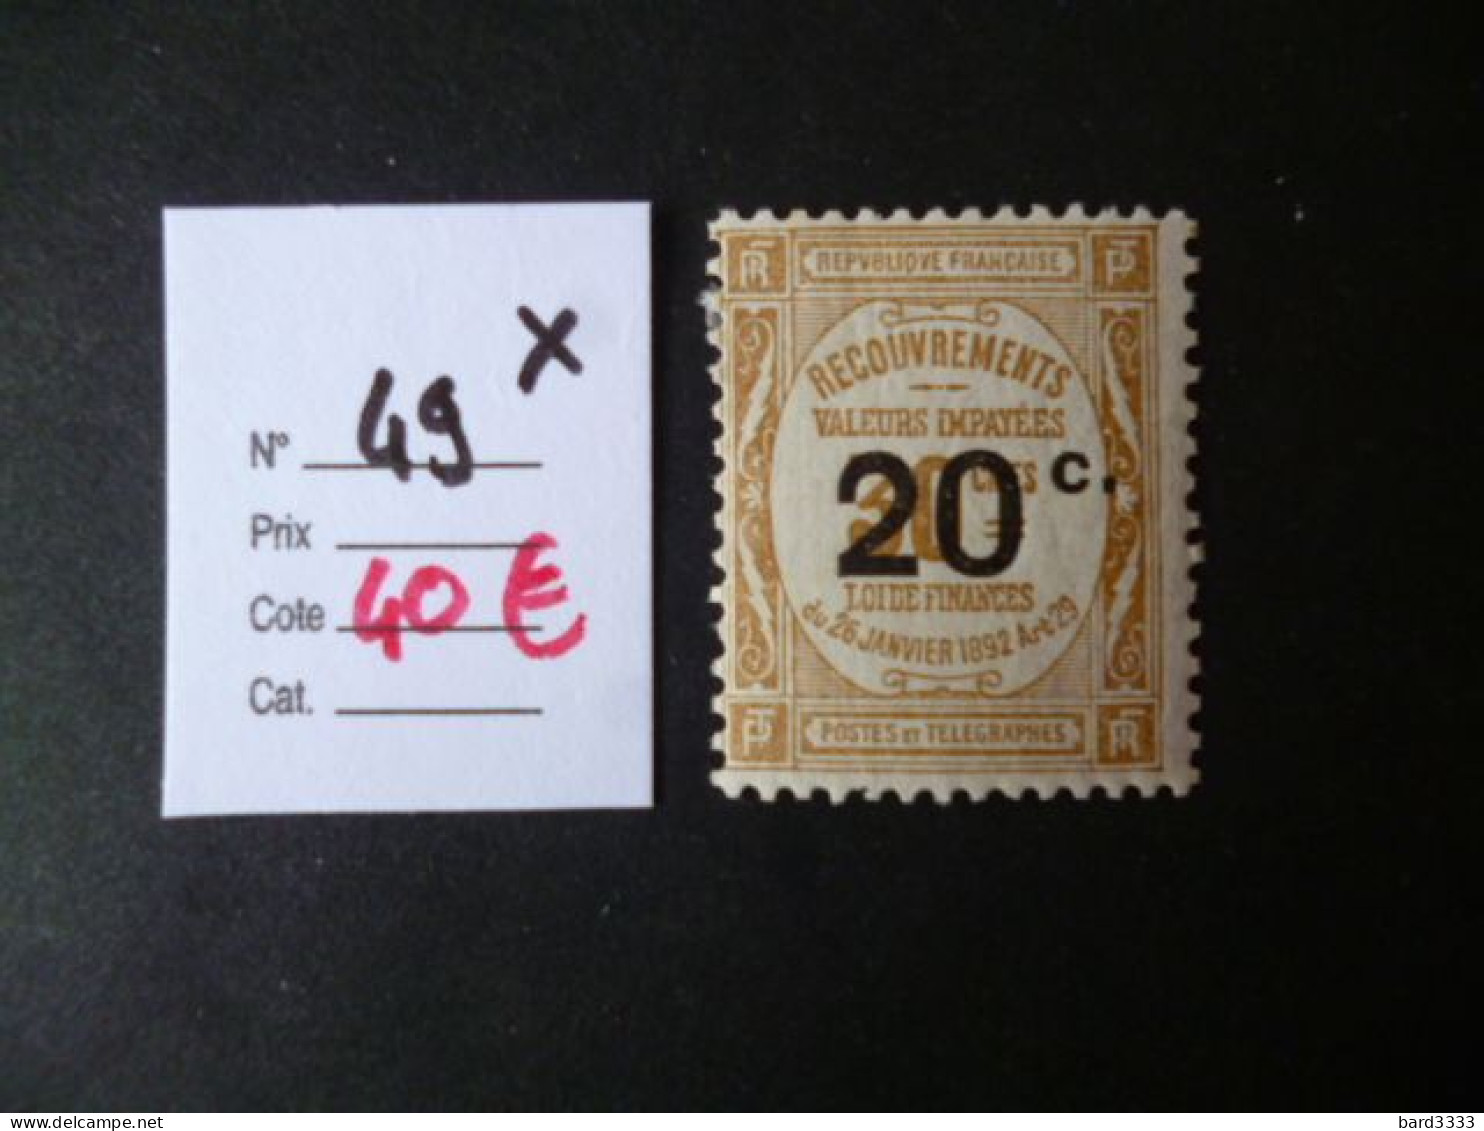 Timbre France Neuf * Taxe N° 49 Cote 40 € - 1859-1959 Neufs